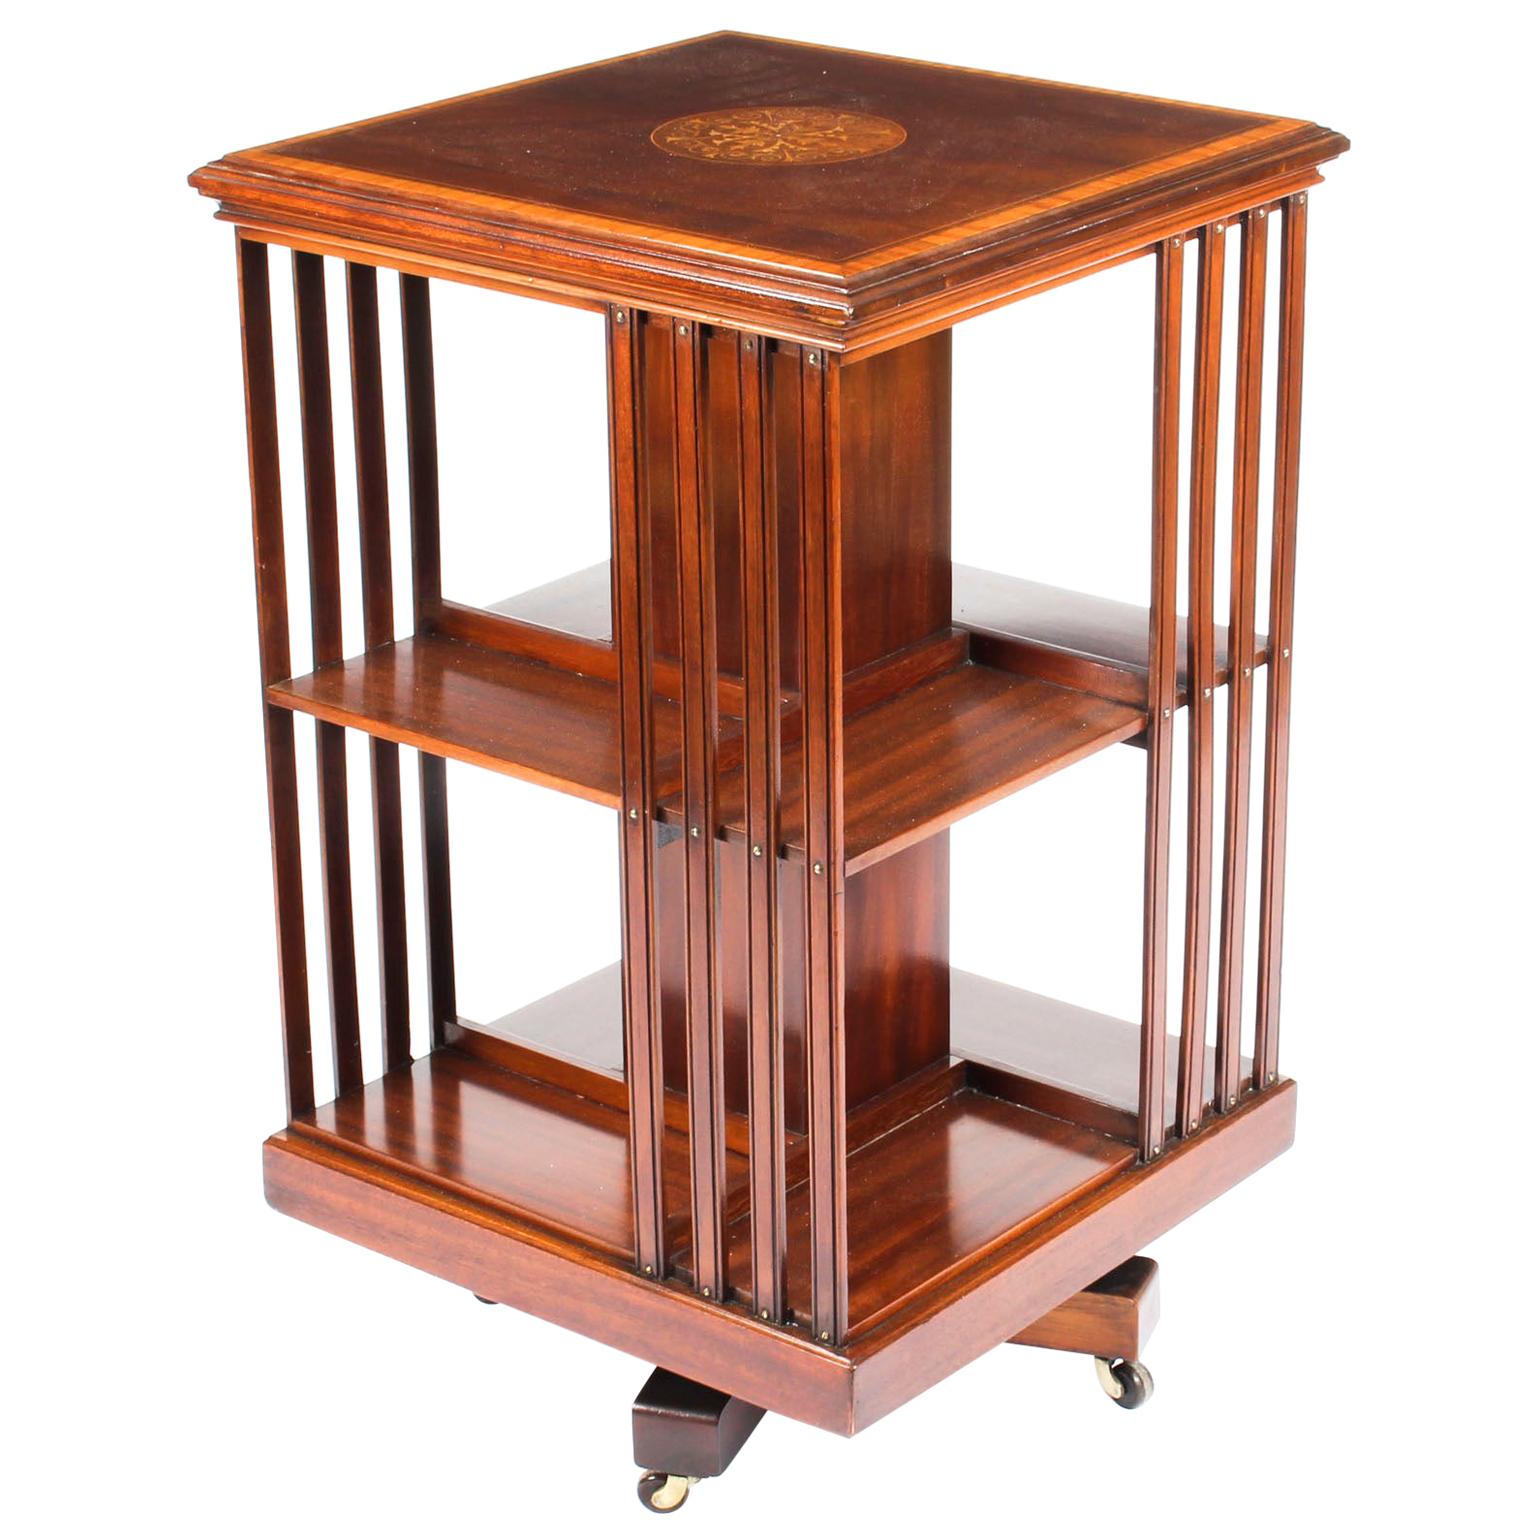 Early 20th Century Edwardian Revolving Bookcase by Edwards & Roberts